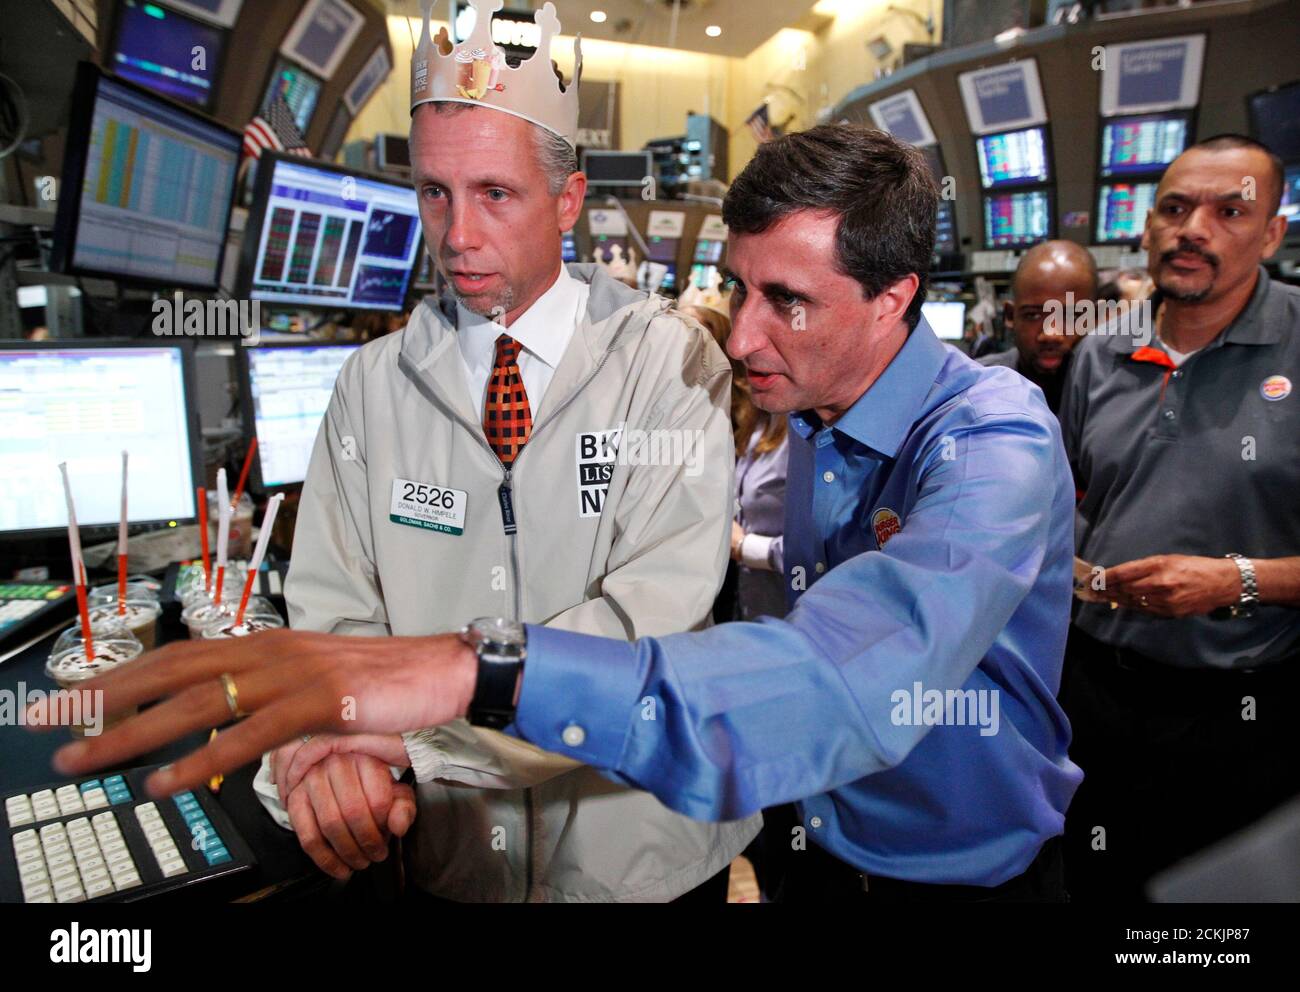 Burger King Corp. CEO Bernardo Hees (C) talks with specialist Donald Himpele (L) after his company's stock began trading at the New York Stock Exchange June 20, 2012. Shares of Burger King Worldwide Holdings Inc opened at $14.50 on Wednesday, as it started its first round of trading, less than two years of going private in a $3.26 billion sale to Brazilian investment fund 3G Capital Management LLC. REUTERS/Brendan McDermid (UNITED STATESBUSINESS - Tags: FOOD BUSINESS) Stock Photo